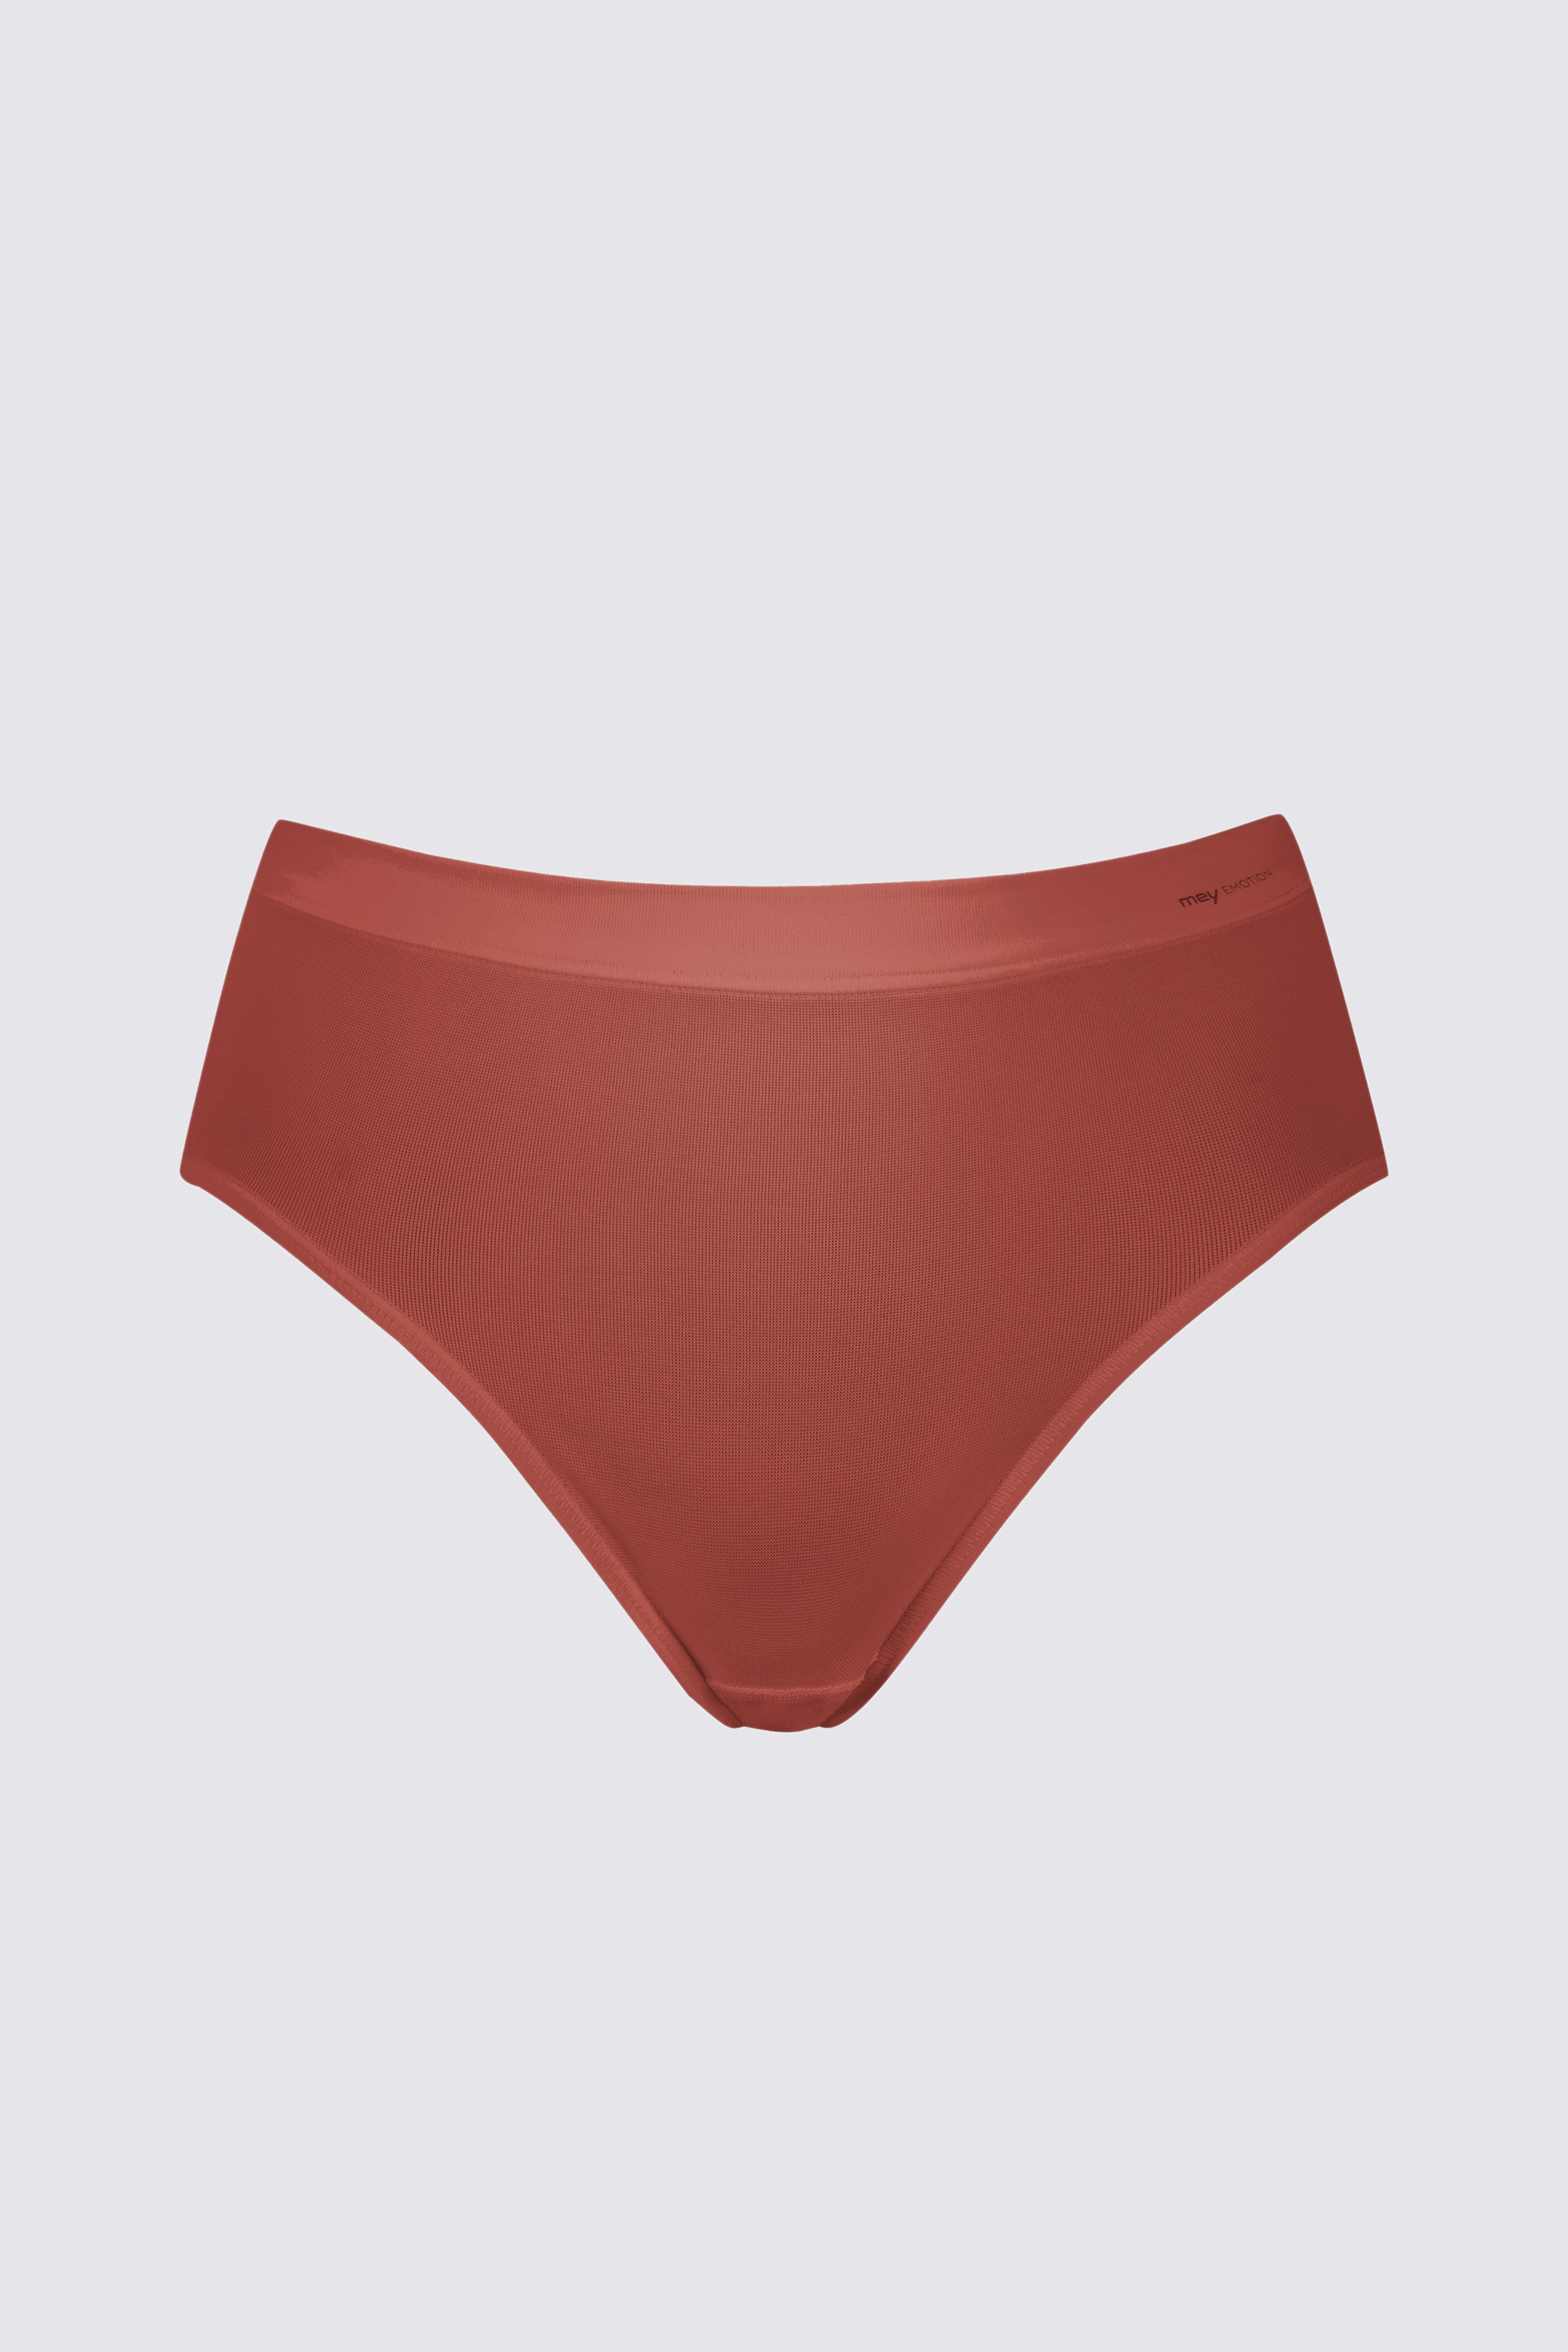 Taille-pants Red Pepper Serie Emotion Uitknippen | mey®